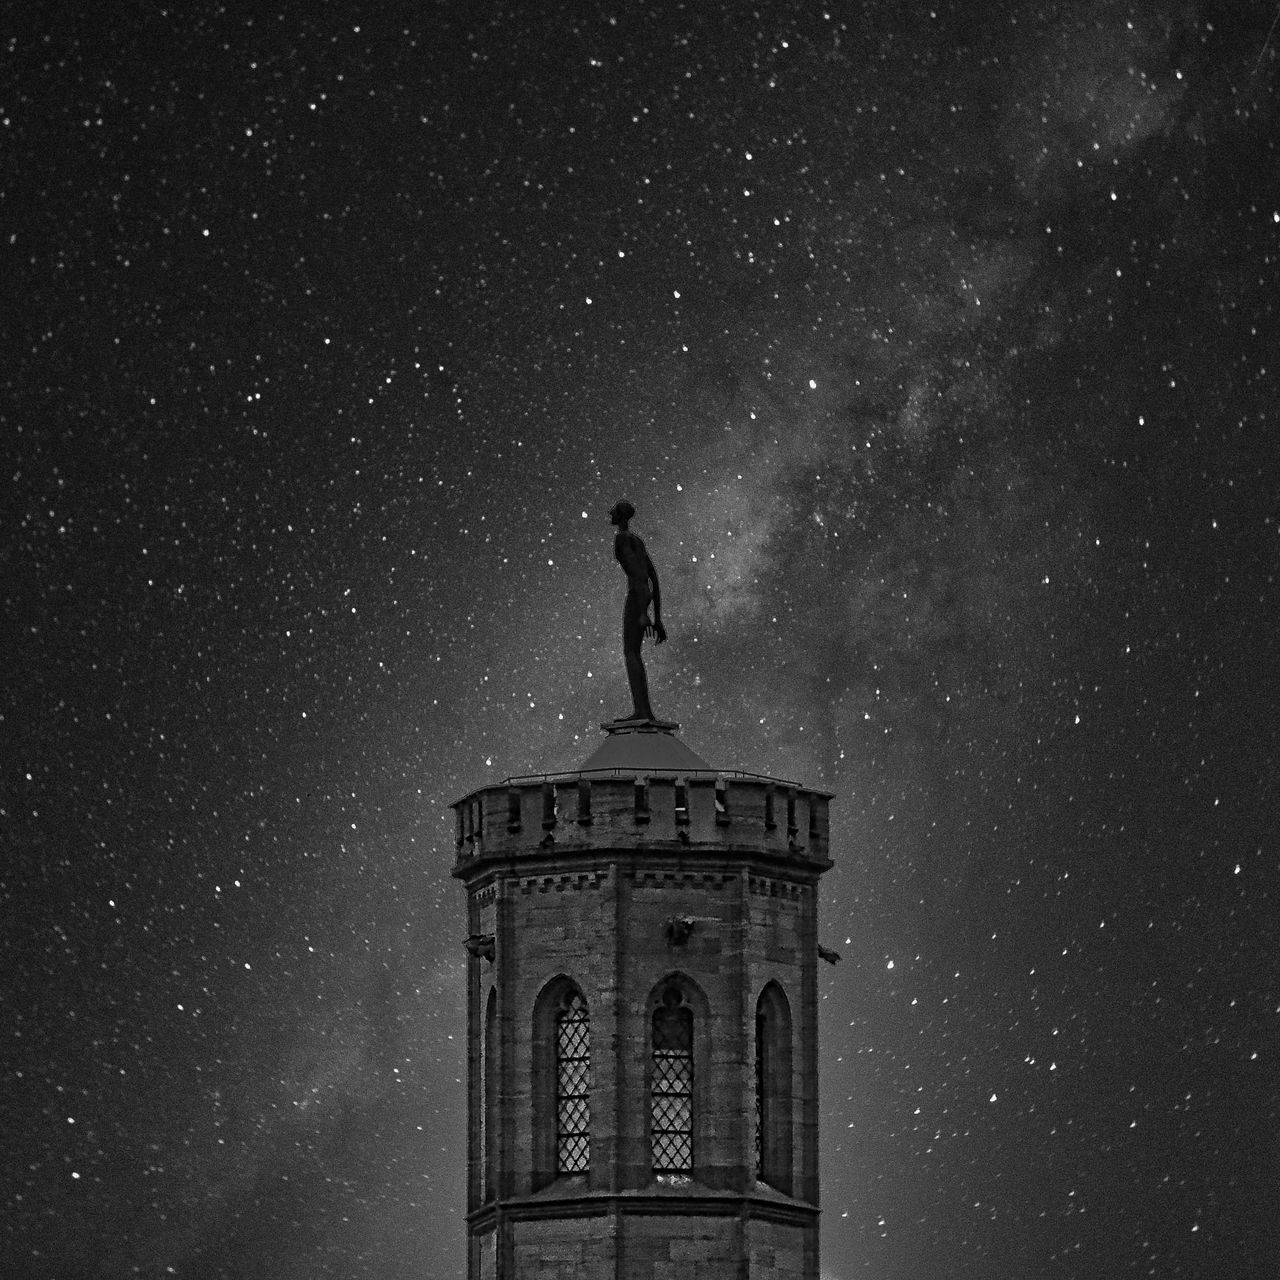 star, night, astronomy, darkness, space, sky, architecture, low angle view, built structure, star field, galaxy, nature, black and white, space and astronomy, building exterior, travel destinations, astronomical object, tower, history, monochrome, constellation, scenics - nature, the past, science, no people, outdoors, midnight